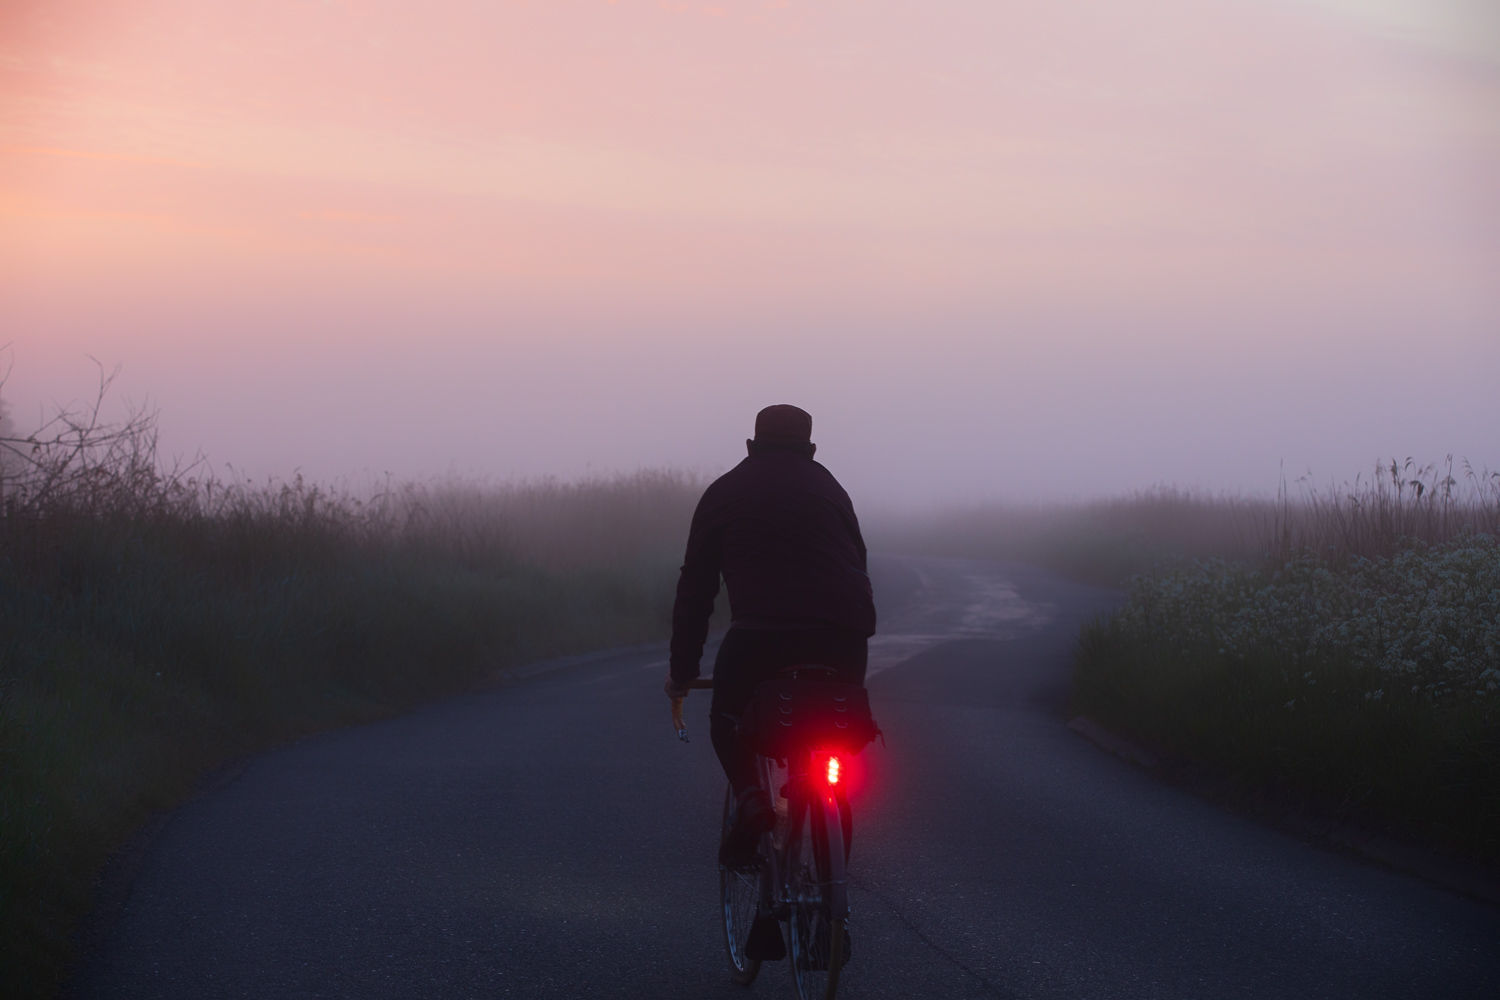 Cyclist with red taillight riding into violet mist at dawn